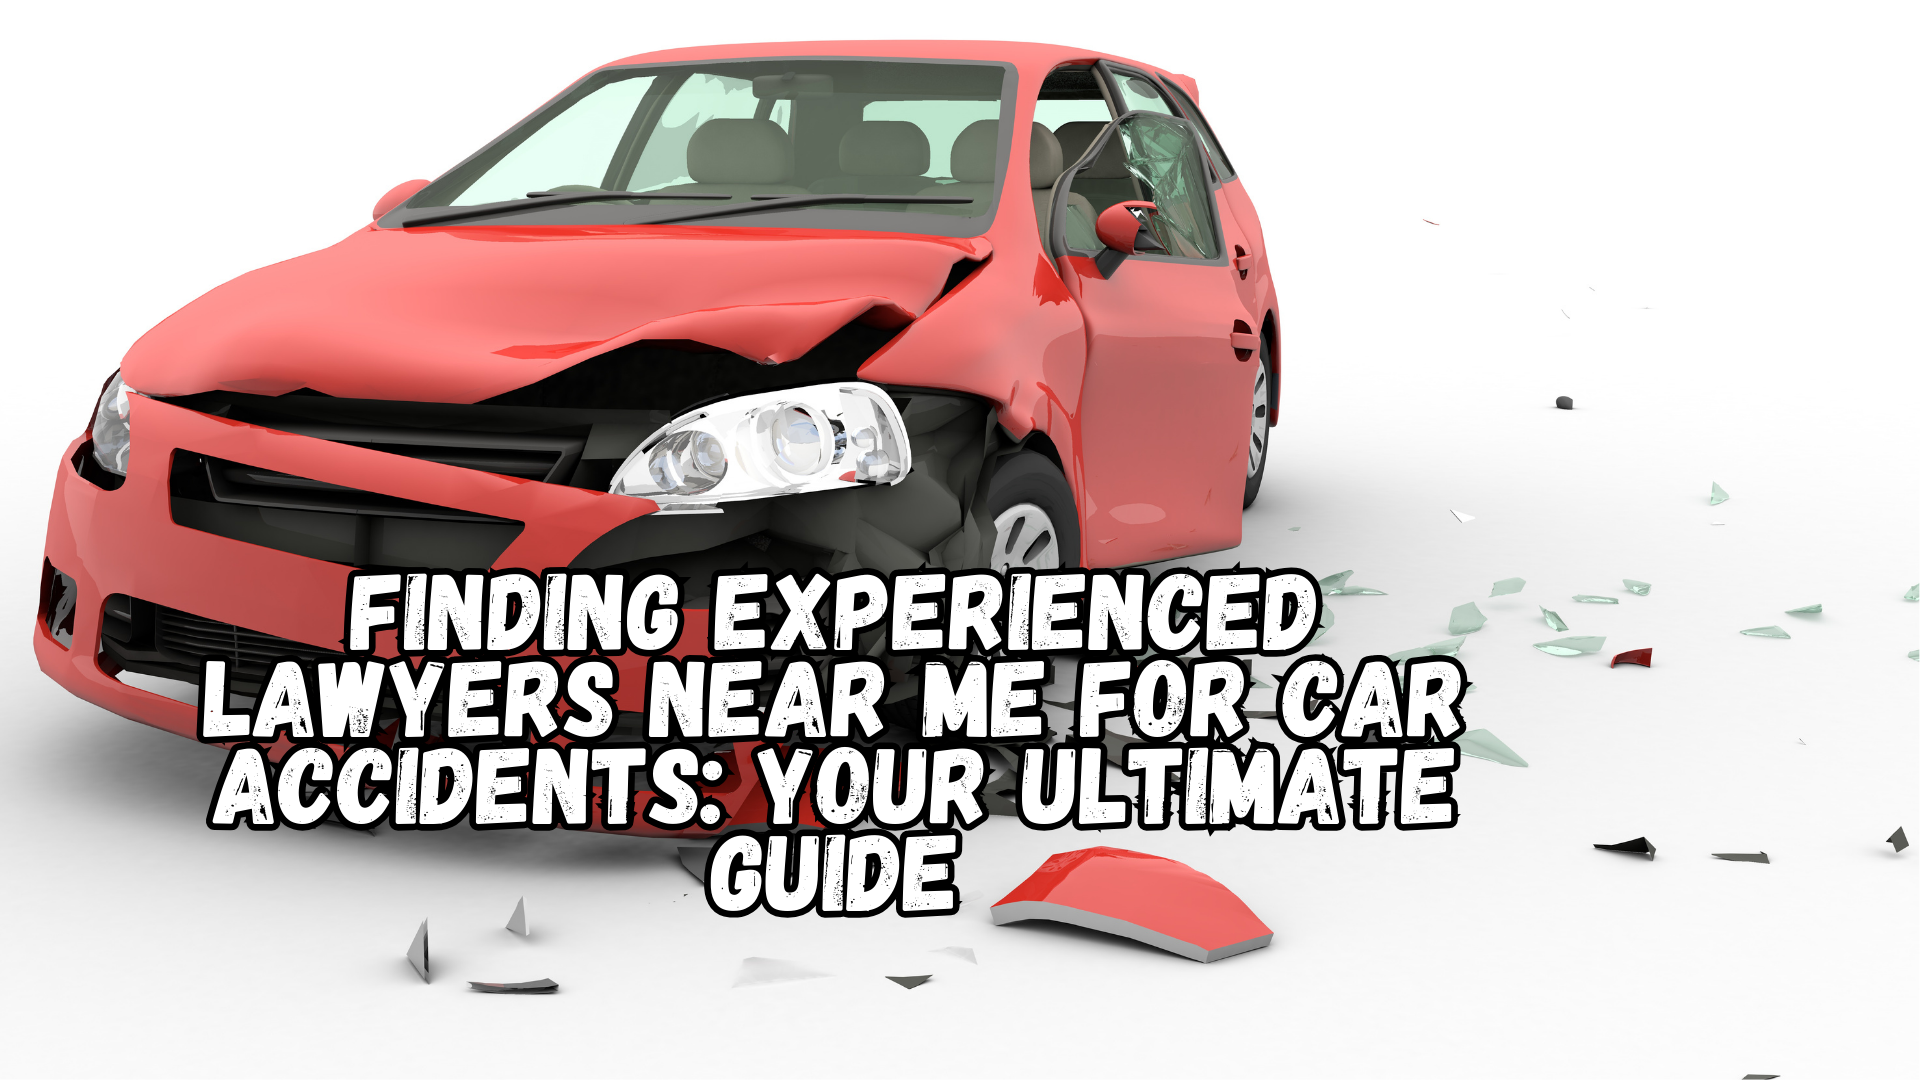 Finding Experienced Lawyers Near Me for Car Accidents: Your Ultimate Guide